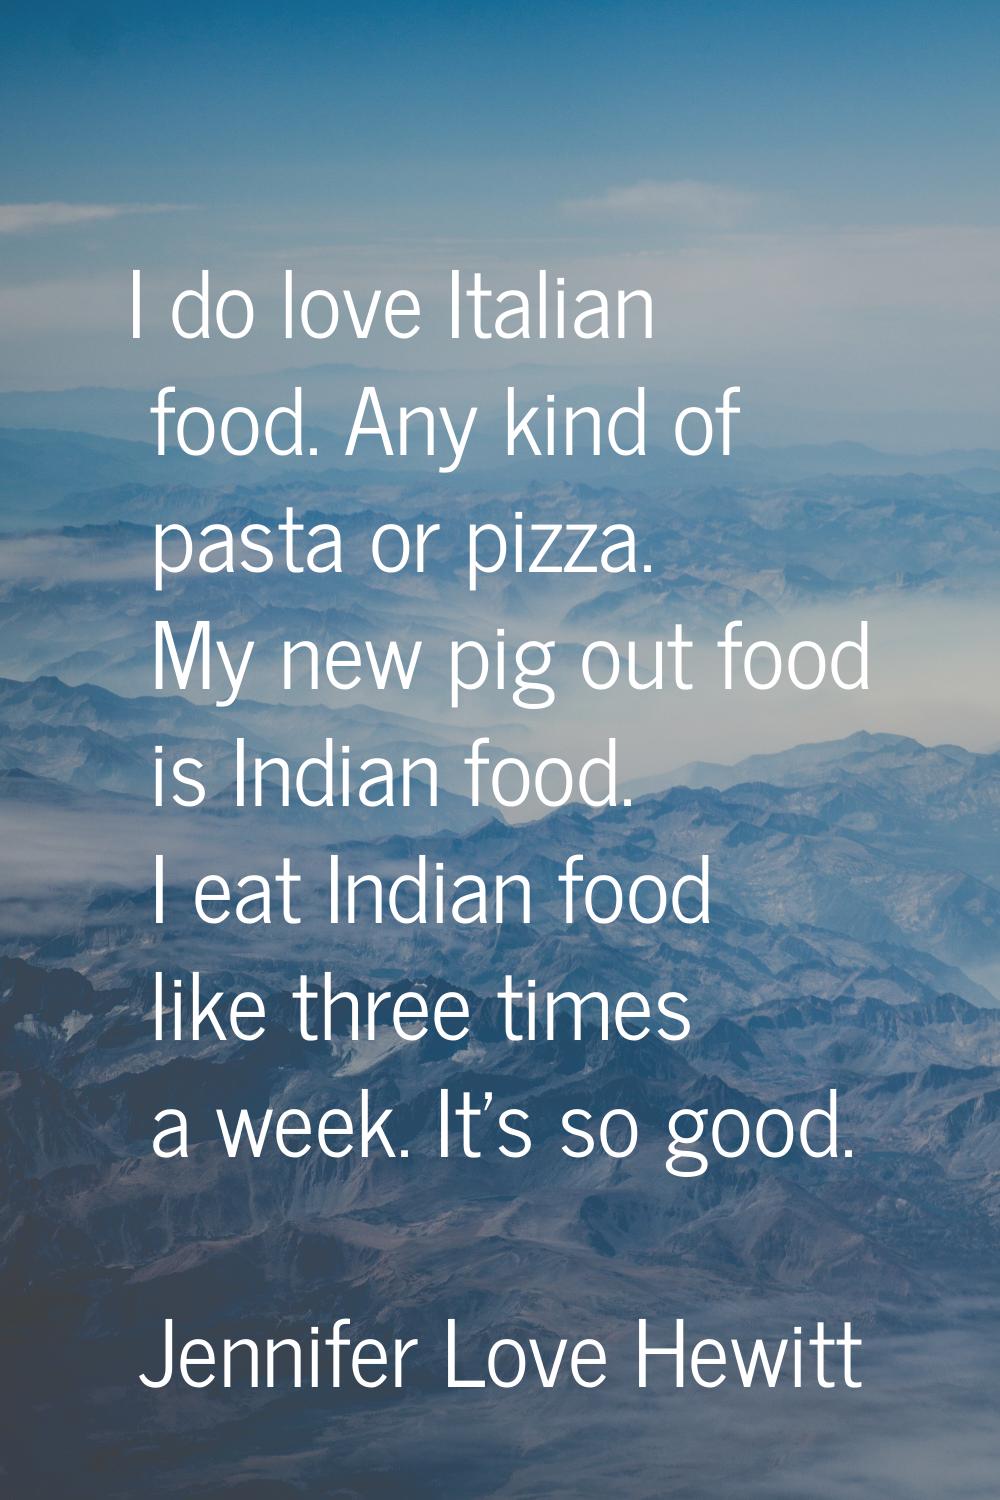 I do love Italian food. Any kind of pasta or pizza. My new pig out food is Indian food. I eat India